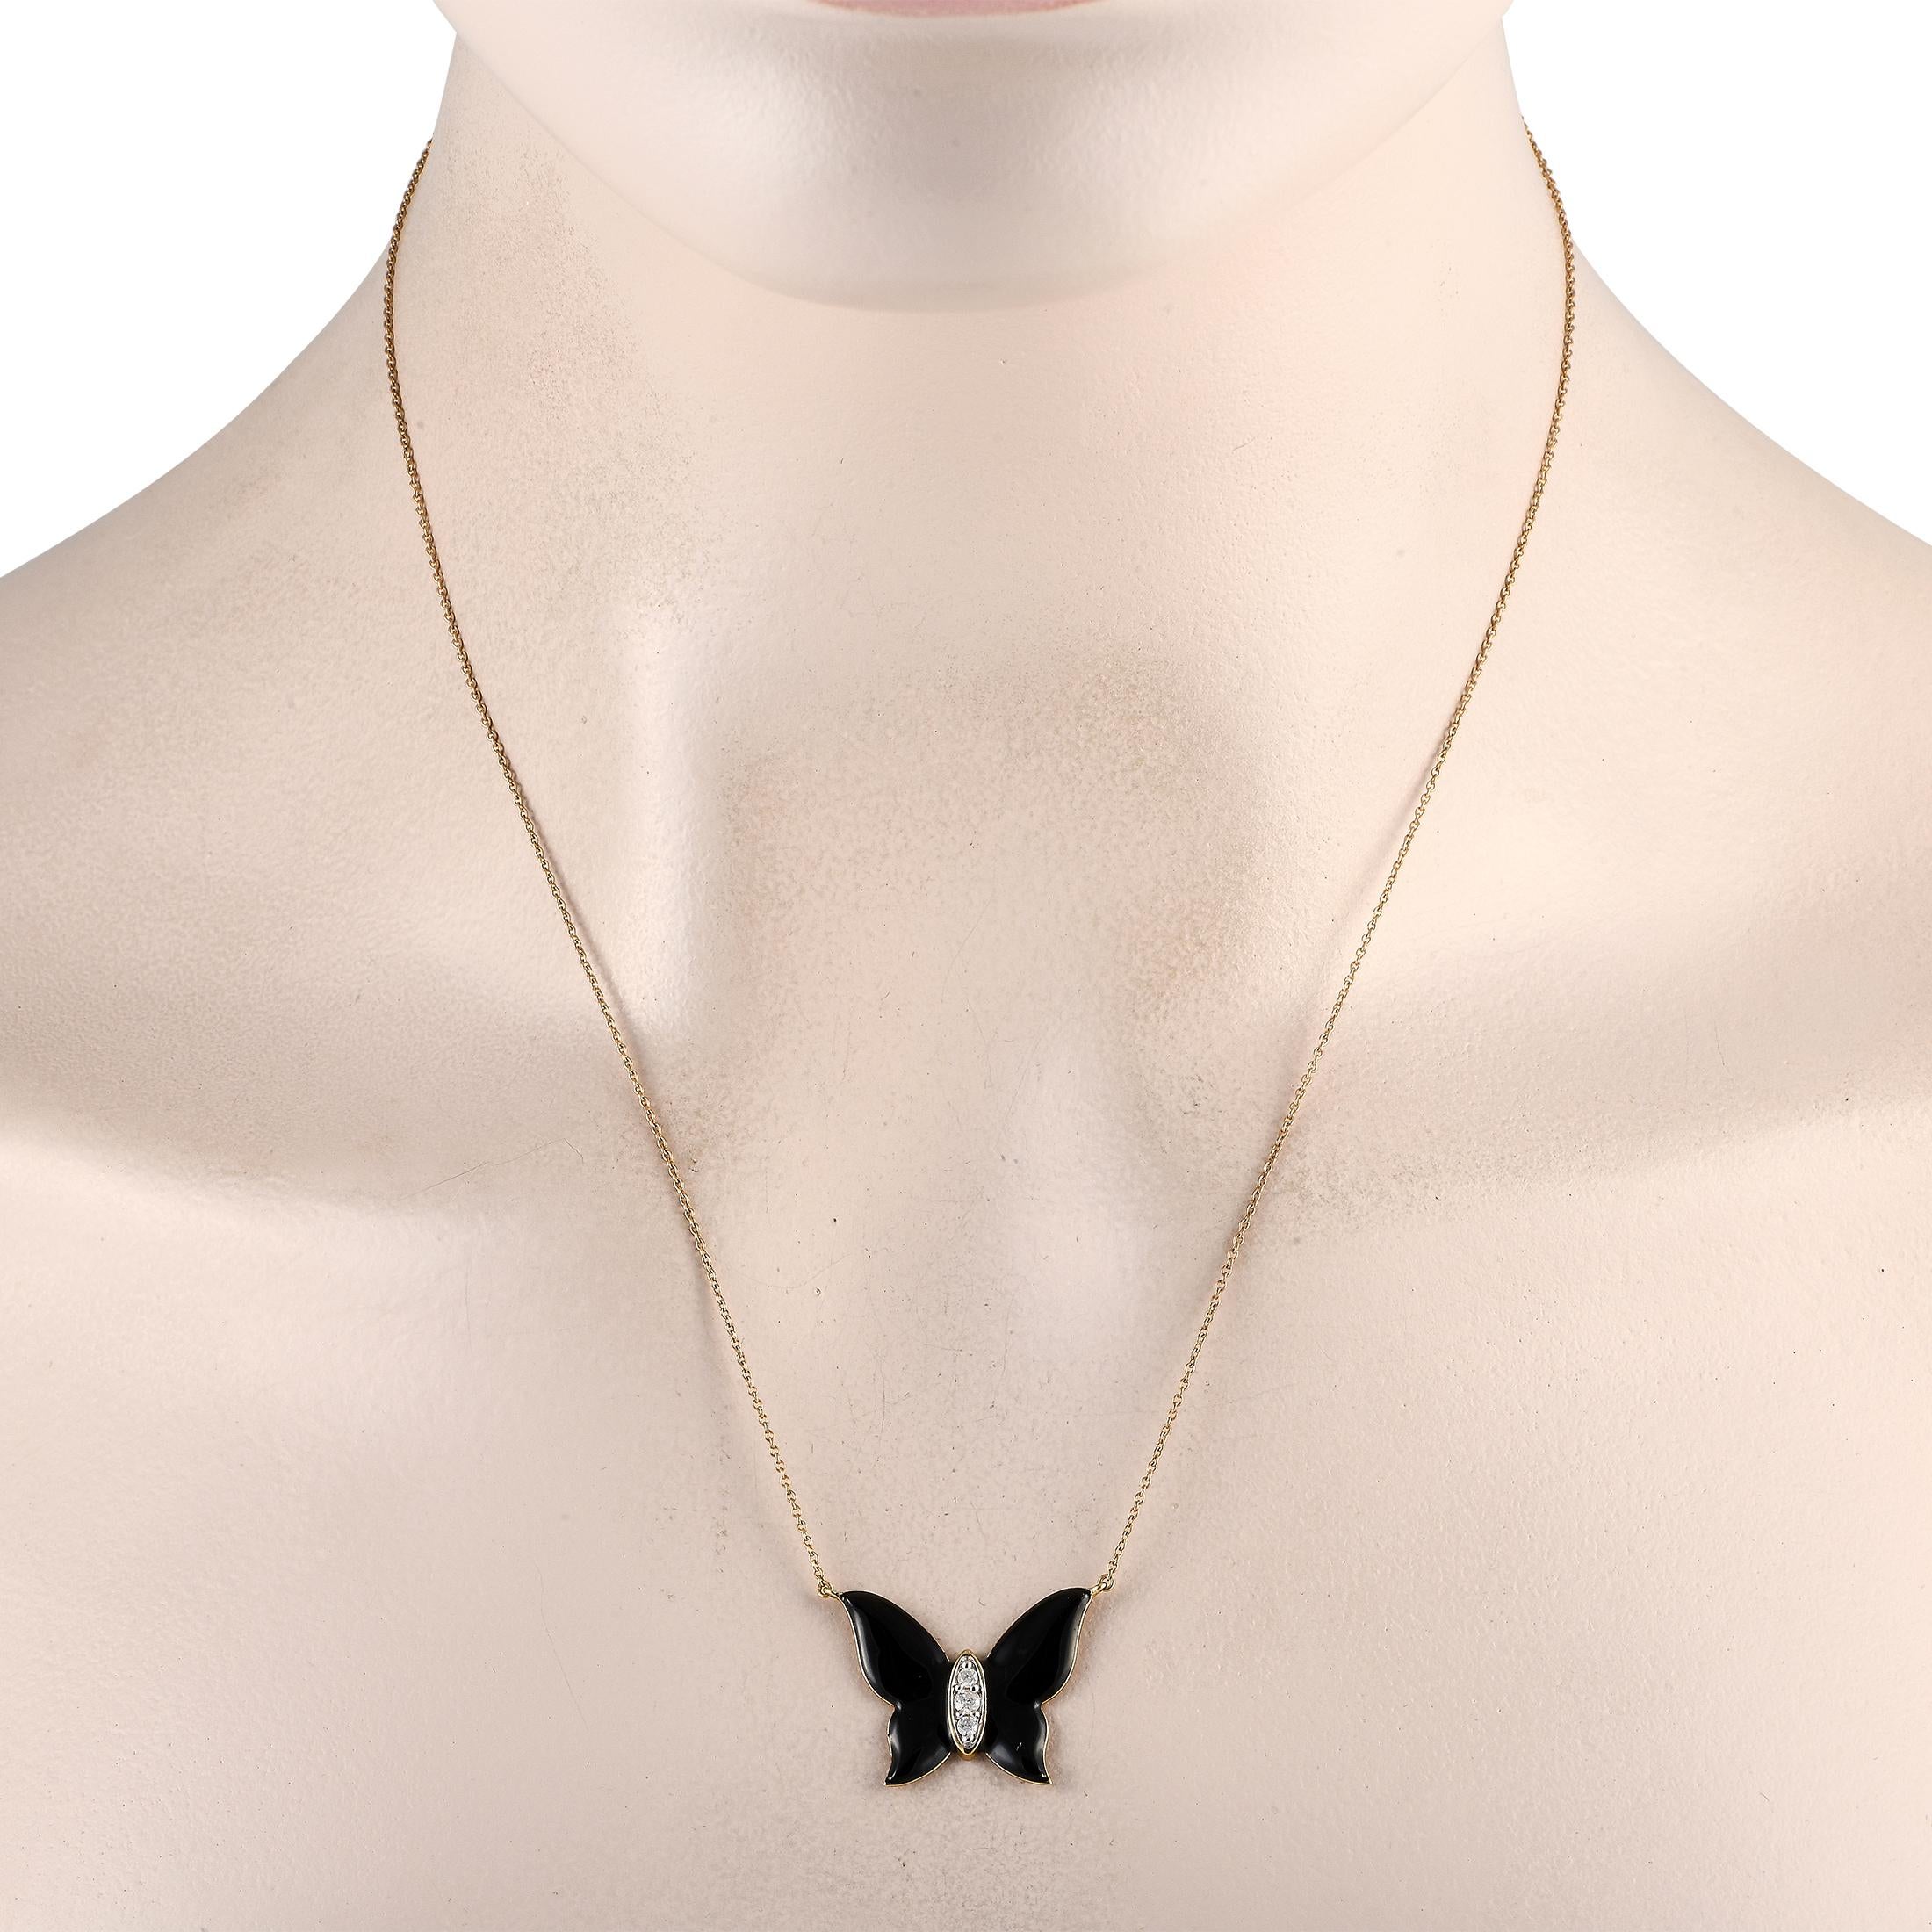 Brimming with mystery and sophistication, this onyx butterfly necklace can elegantly complete any outfit. For a striking sparkle, the butterfly pendant's center features a marquise bezel filled with a trio of round diamonds.This brand new 14K Yellow